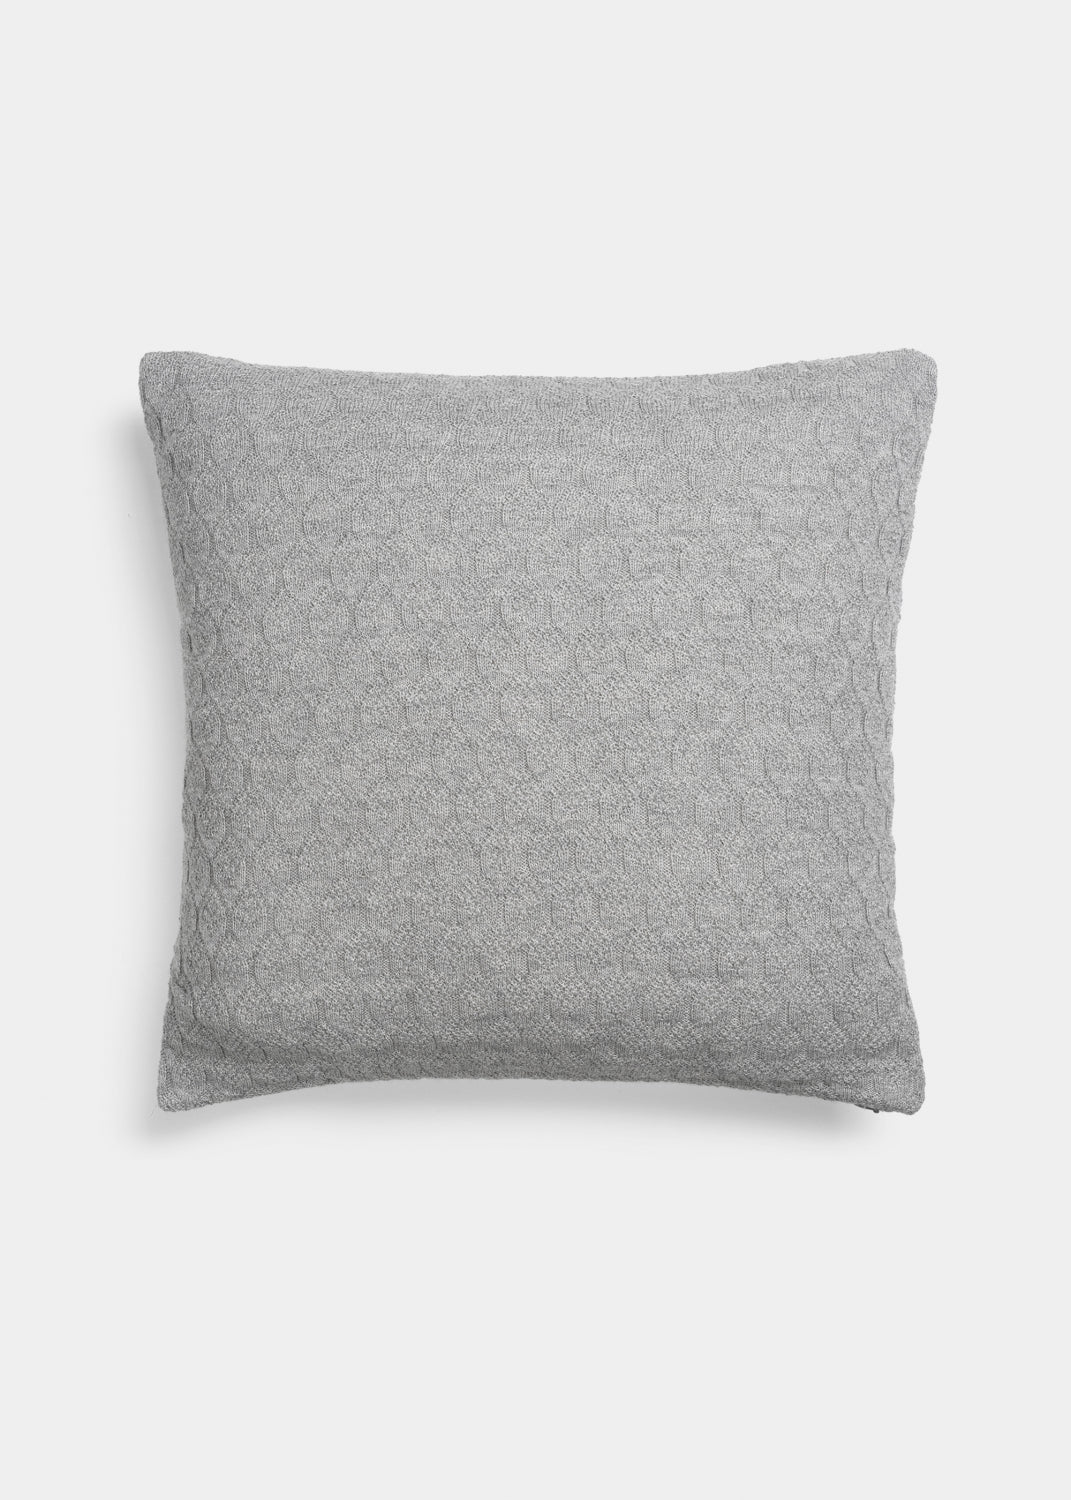 PILLOW RAUL CLASSIC 50*50 - FROST GREY - Dale